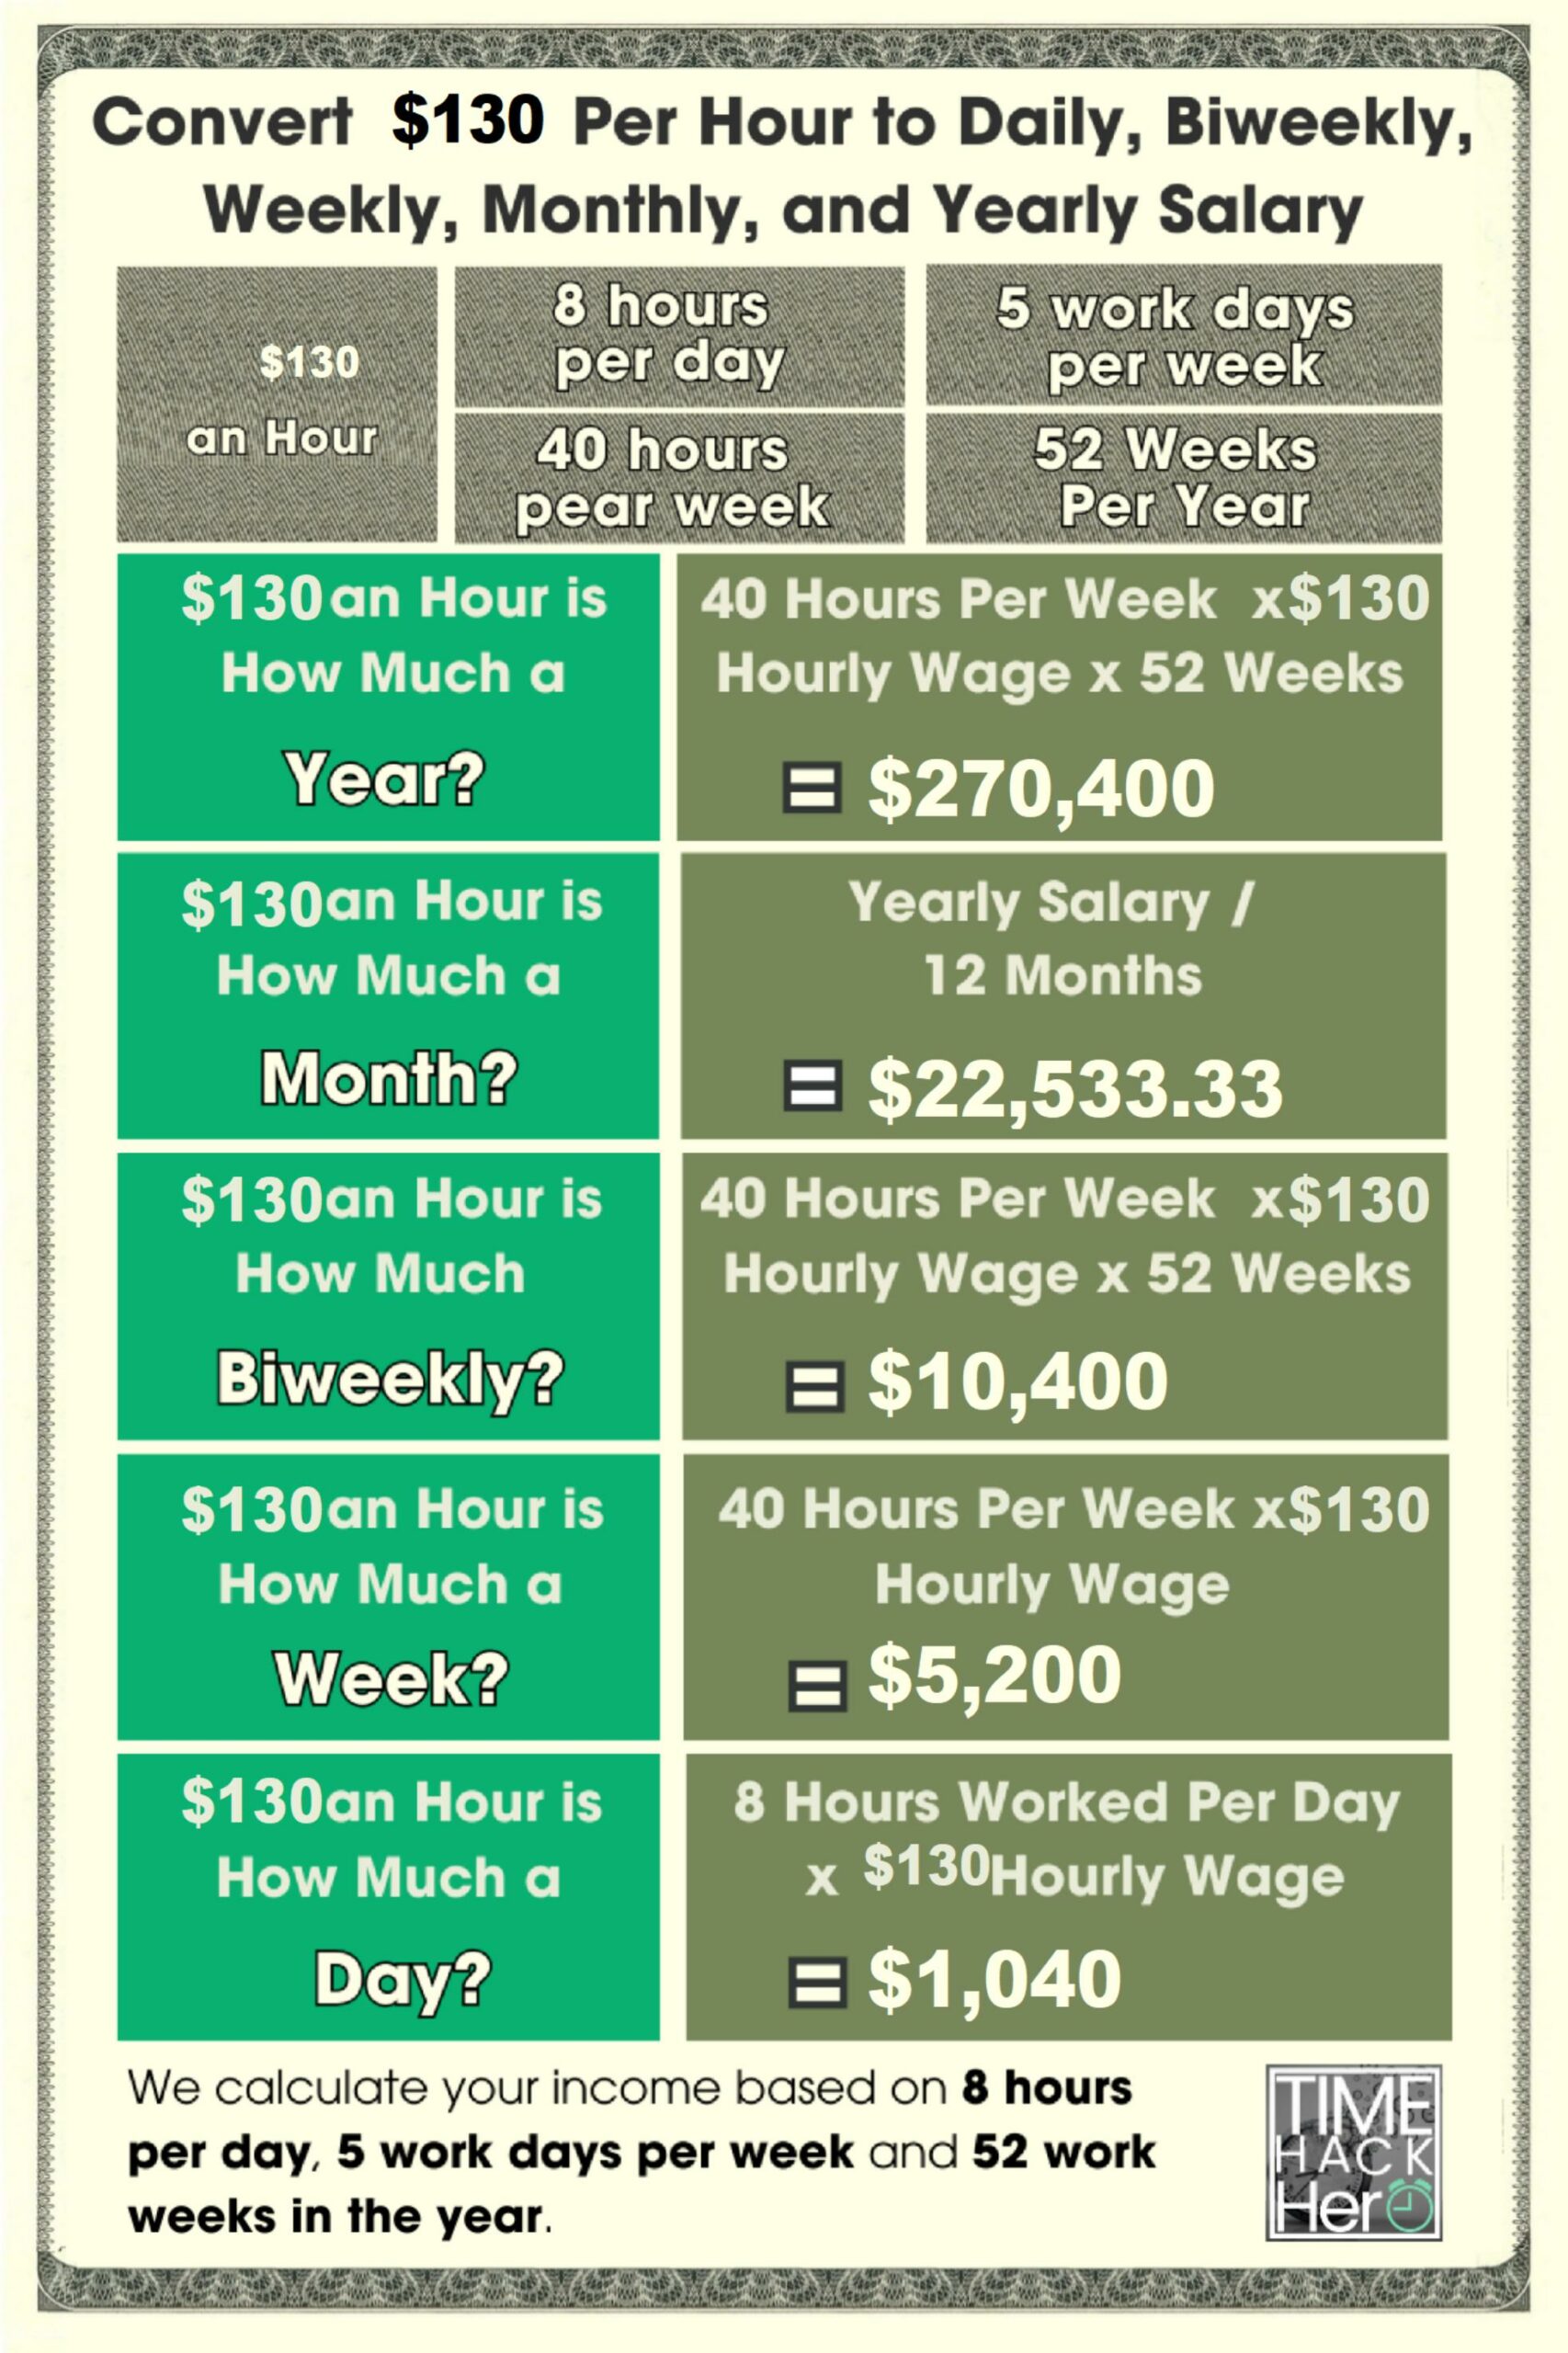 Convert $130 Per Hour to Weekly, Monthly, and Yearly Salary